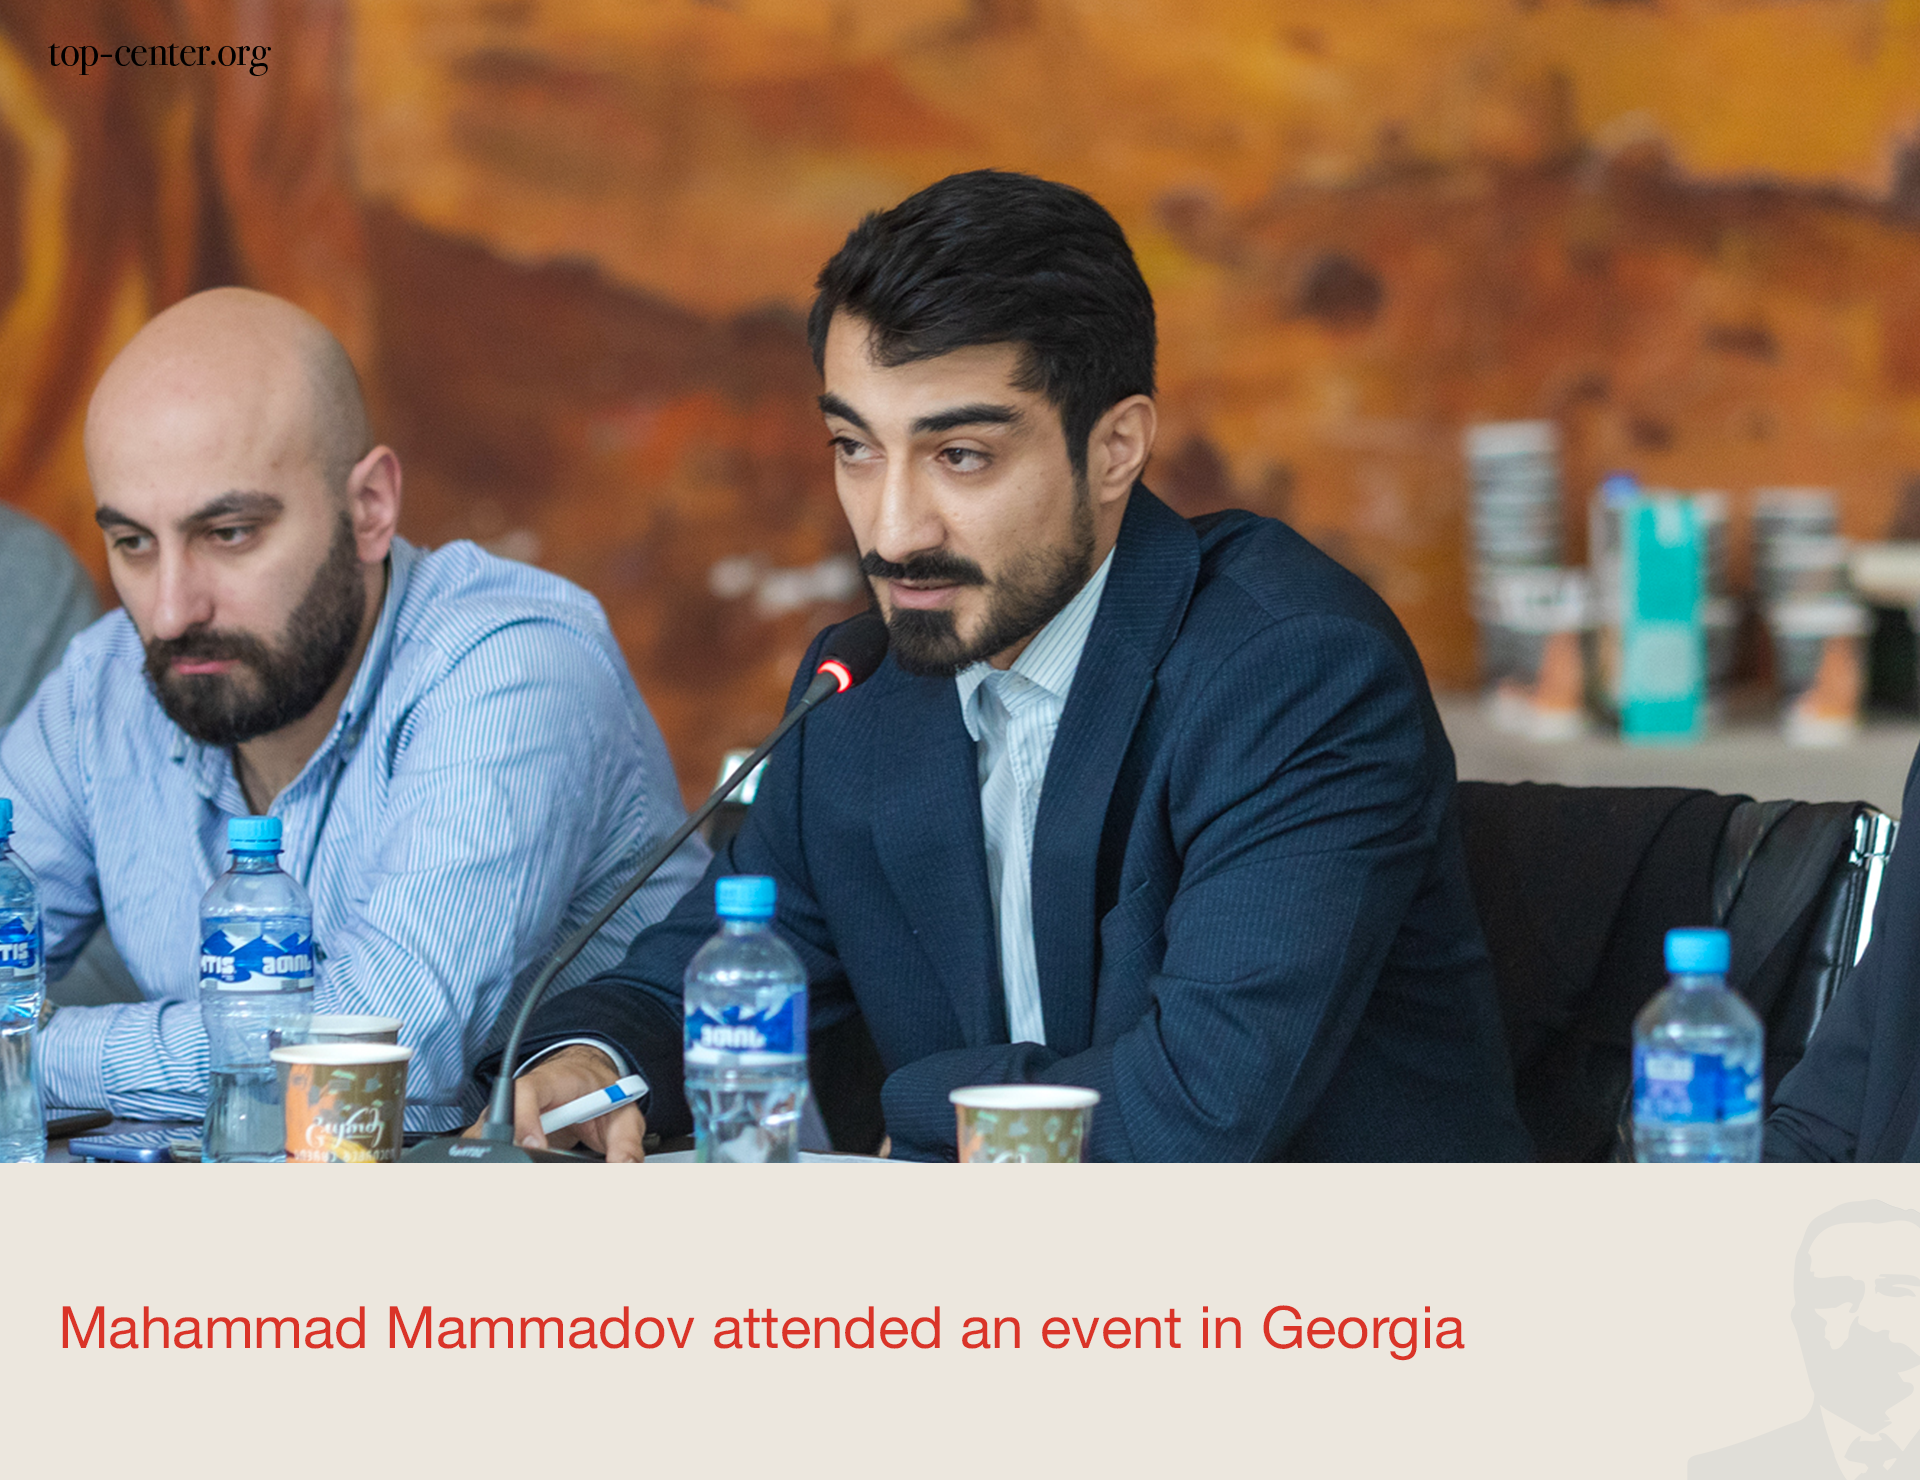 Mahammad Mammadov attends an event in Georgia